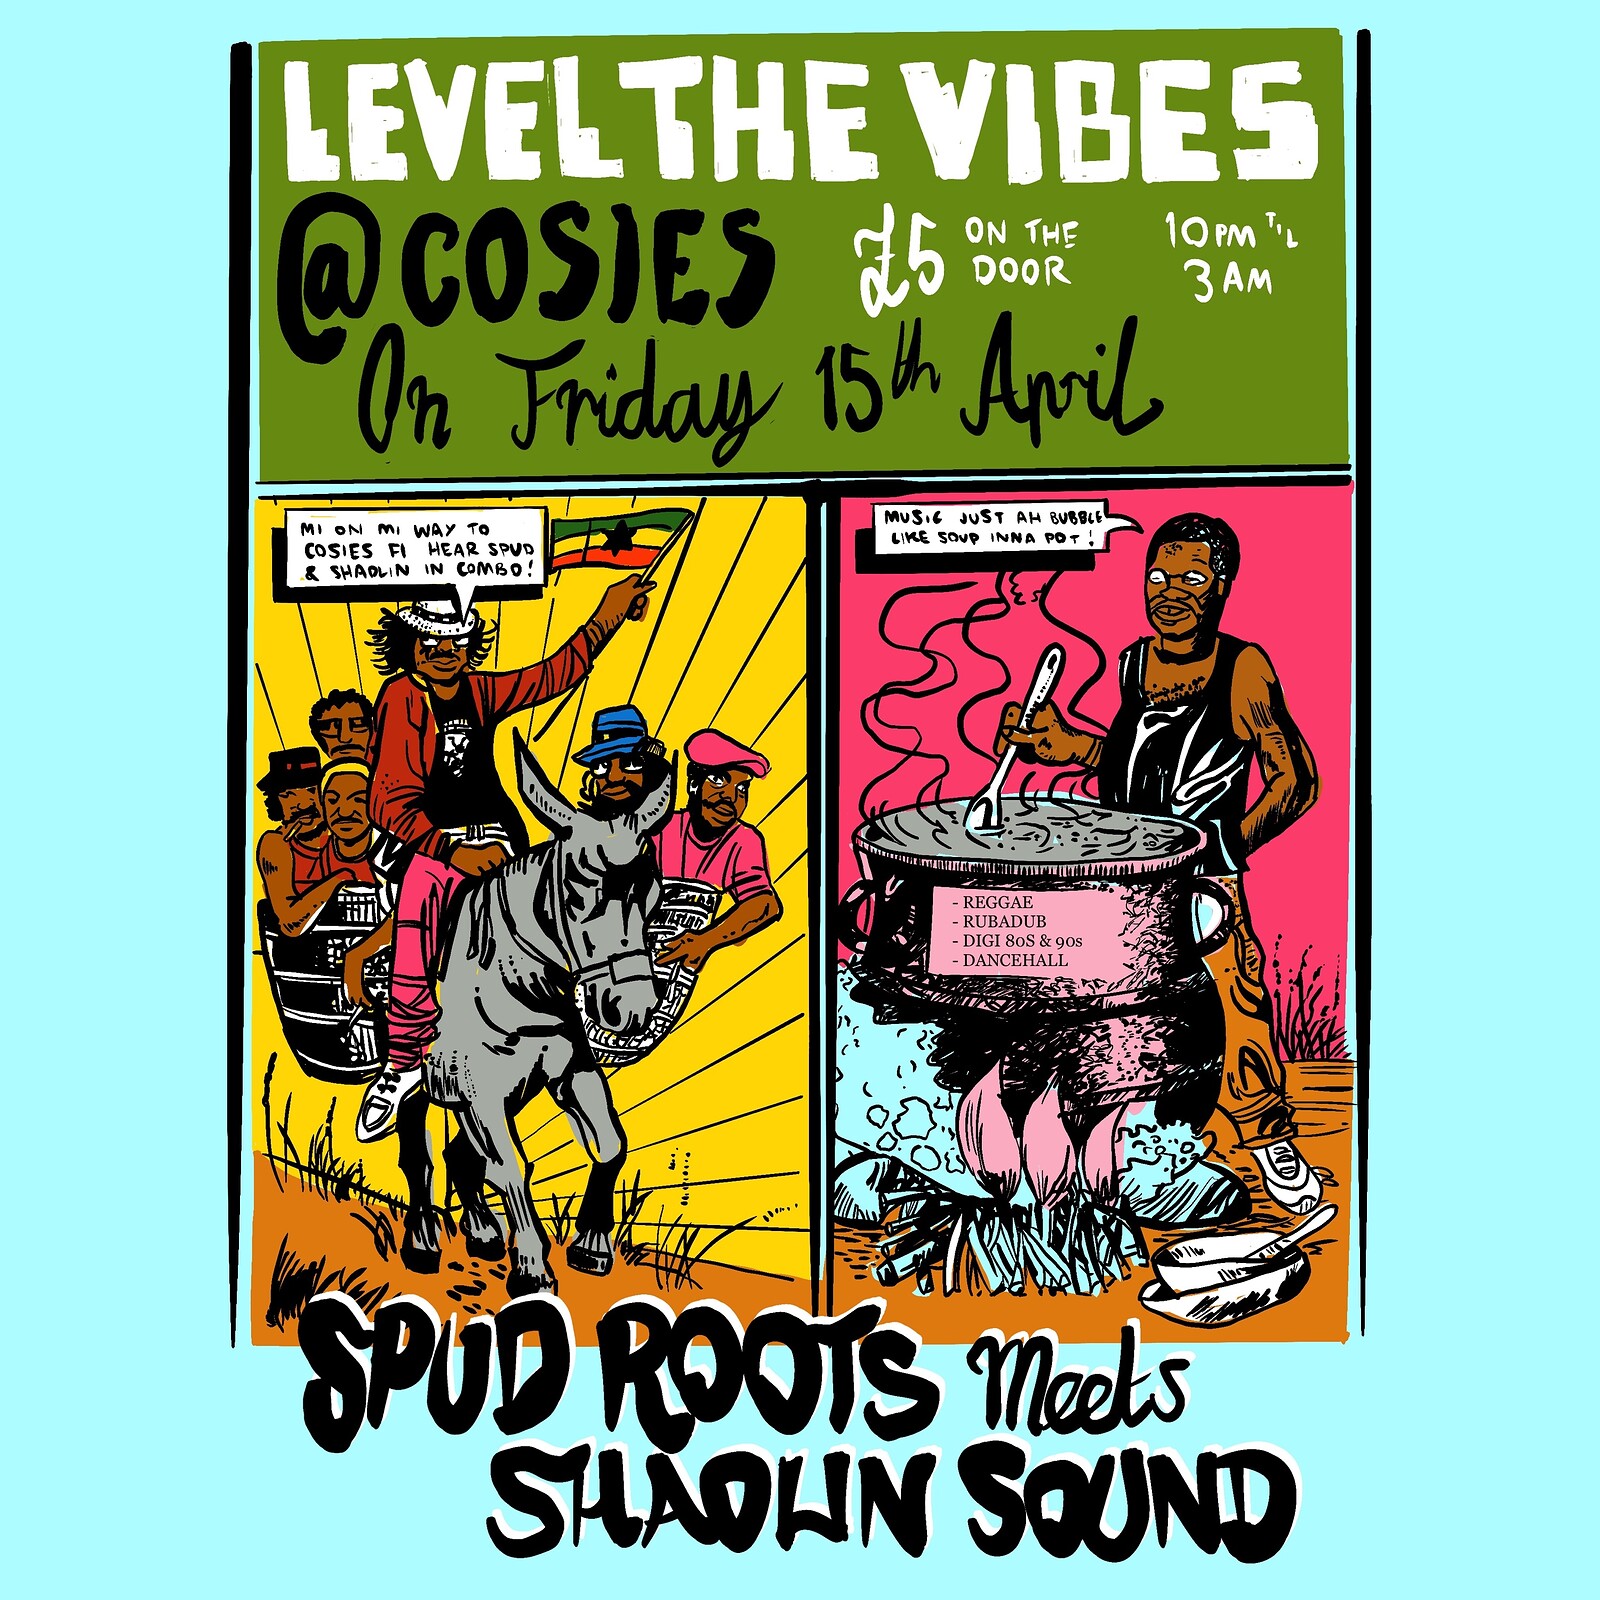 Level the Vibes Pres. Shaolin Sound & Spud Roots at Cosies